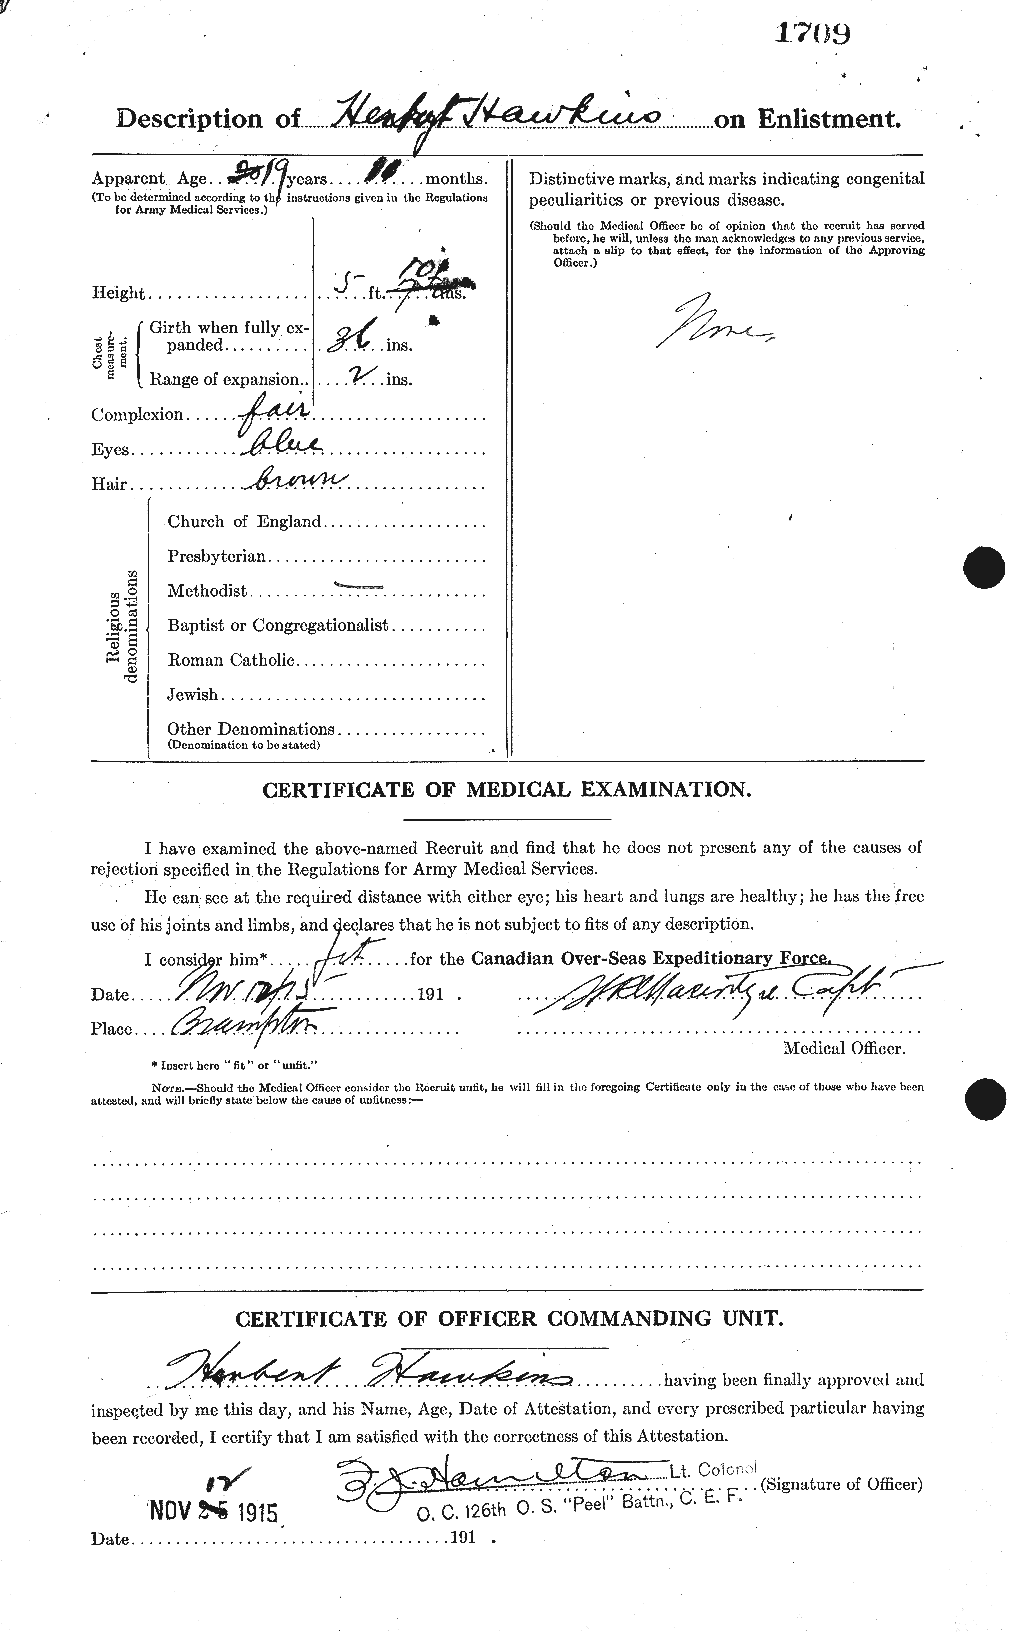 Personnel Records of the First World War - CEF 387149b